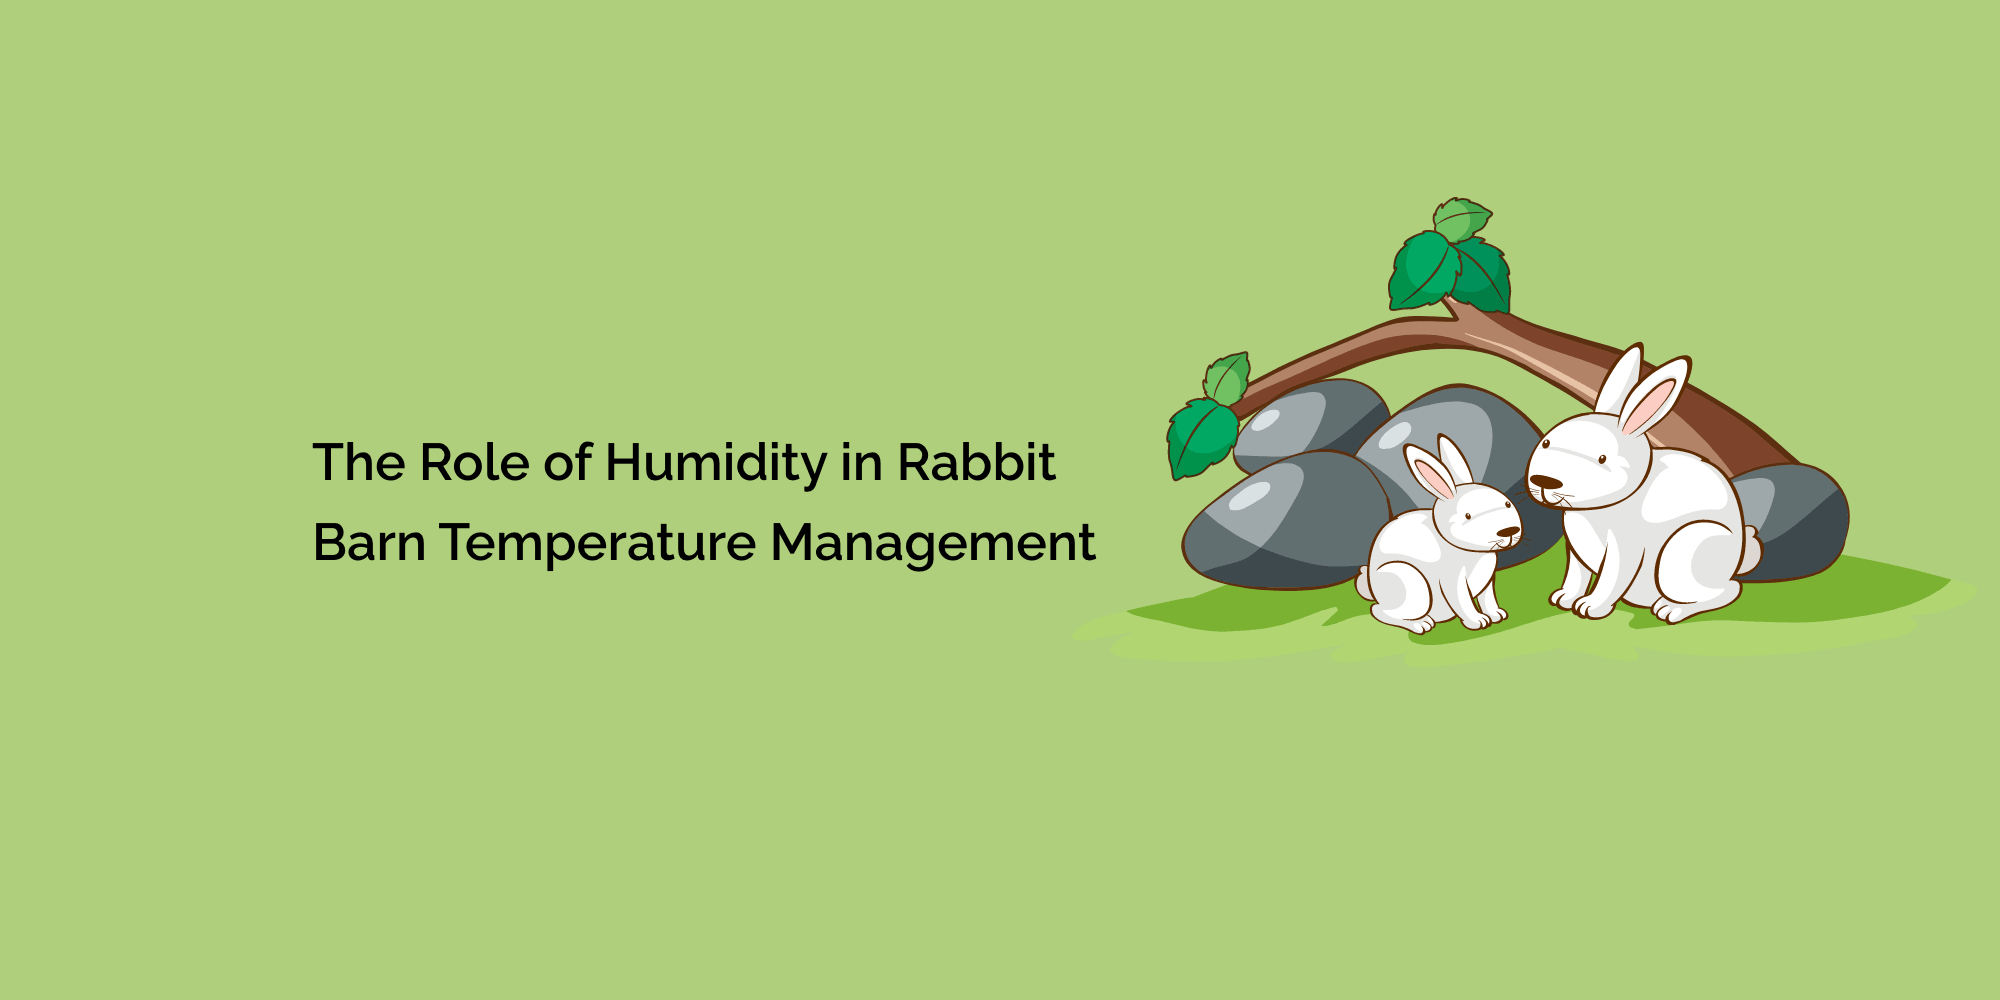 The Role of Humidity in Rabbit Barn Temperature Management